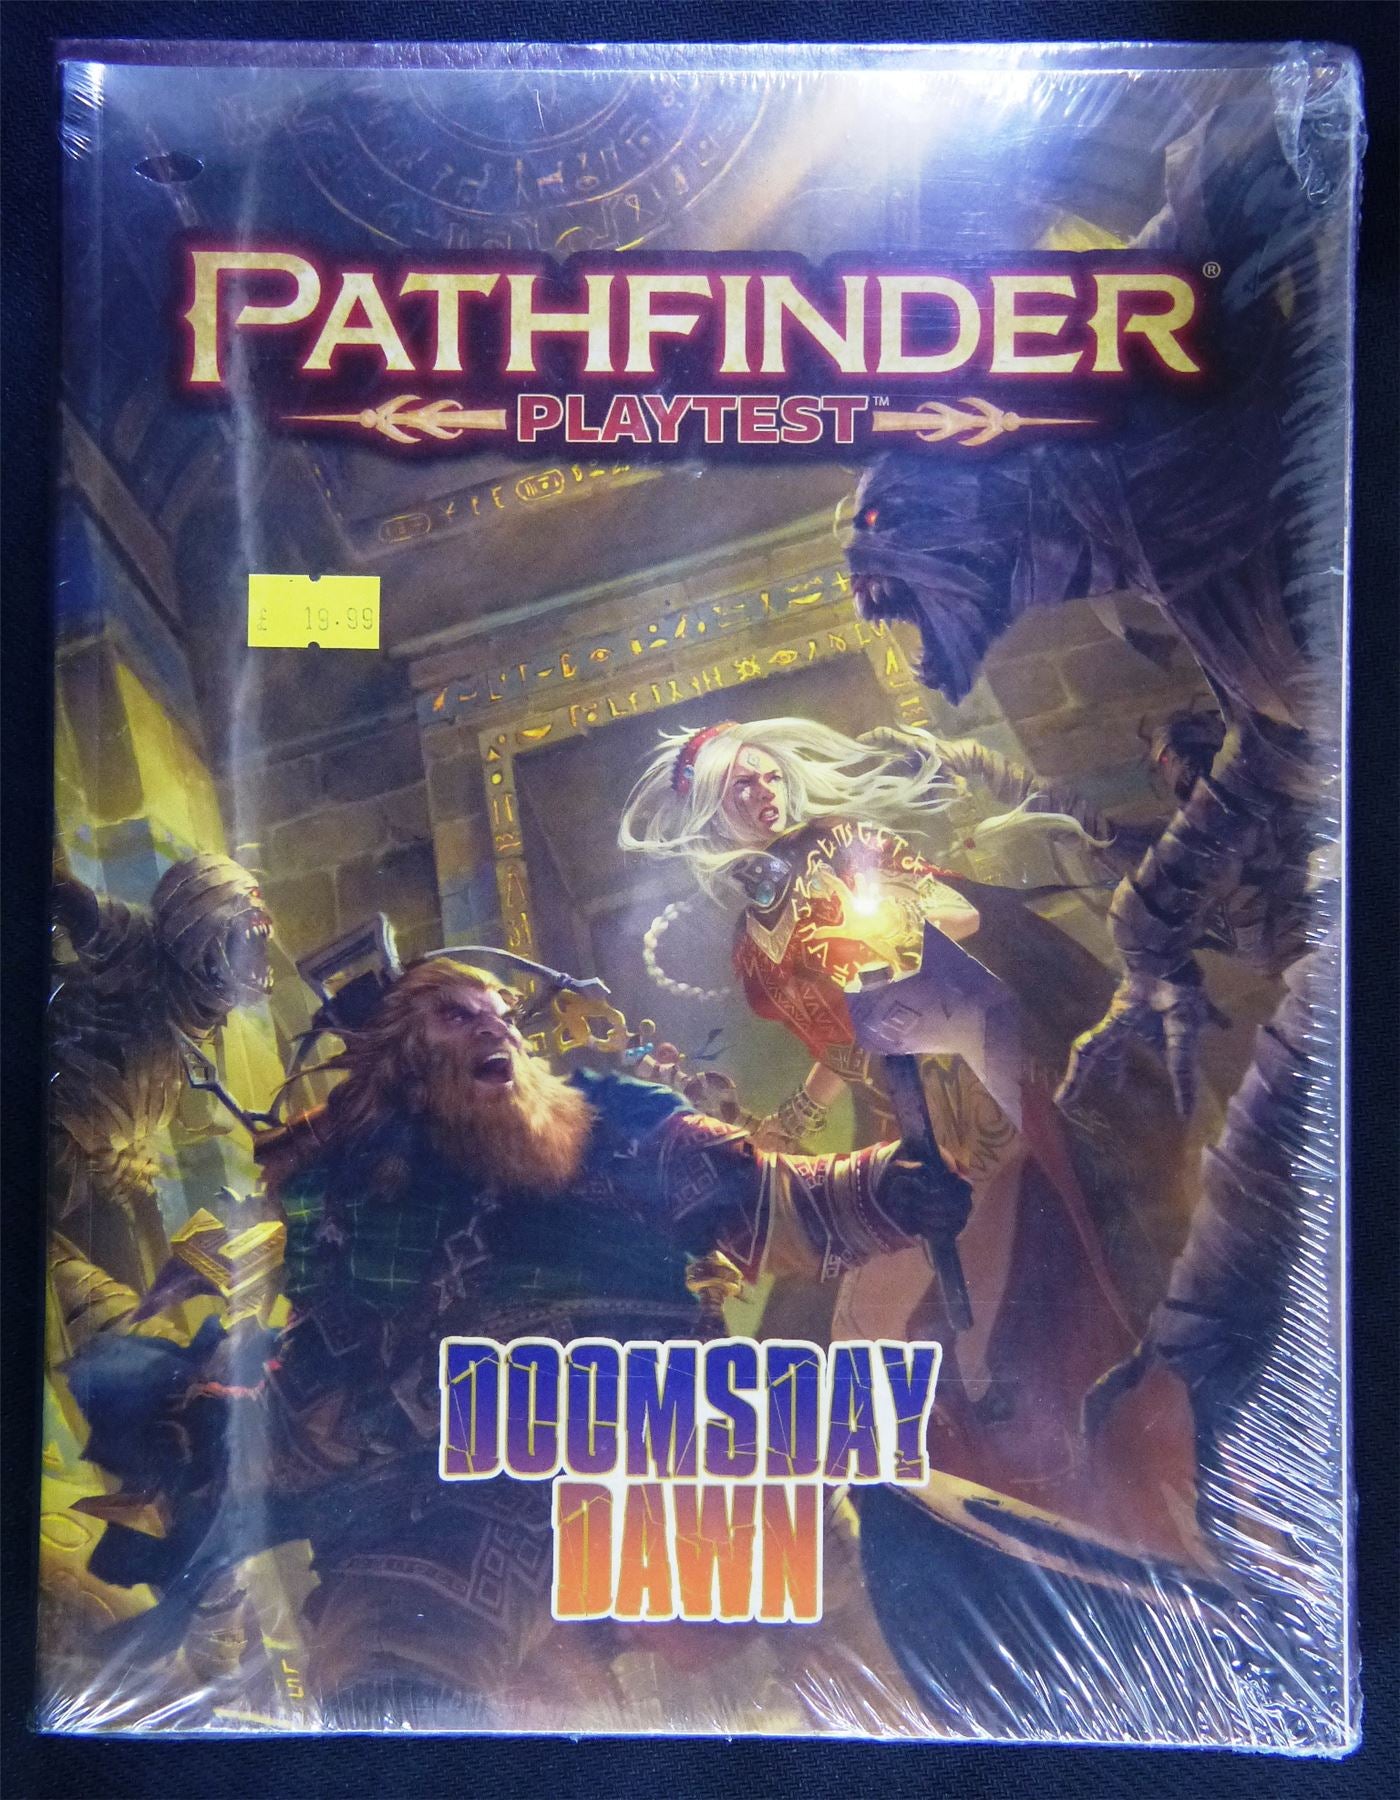 Pathfinder - Playtest Rulebook And Doomsday Dawn - Roleplay - RPG #14E